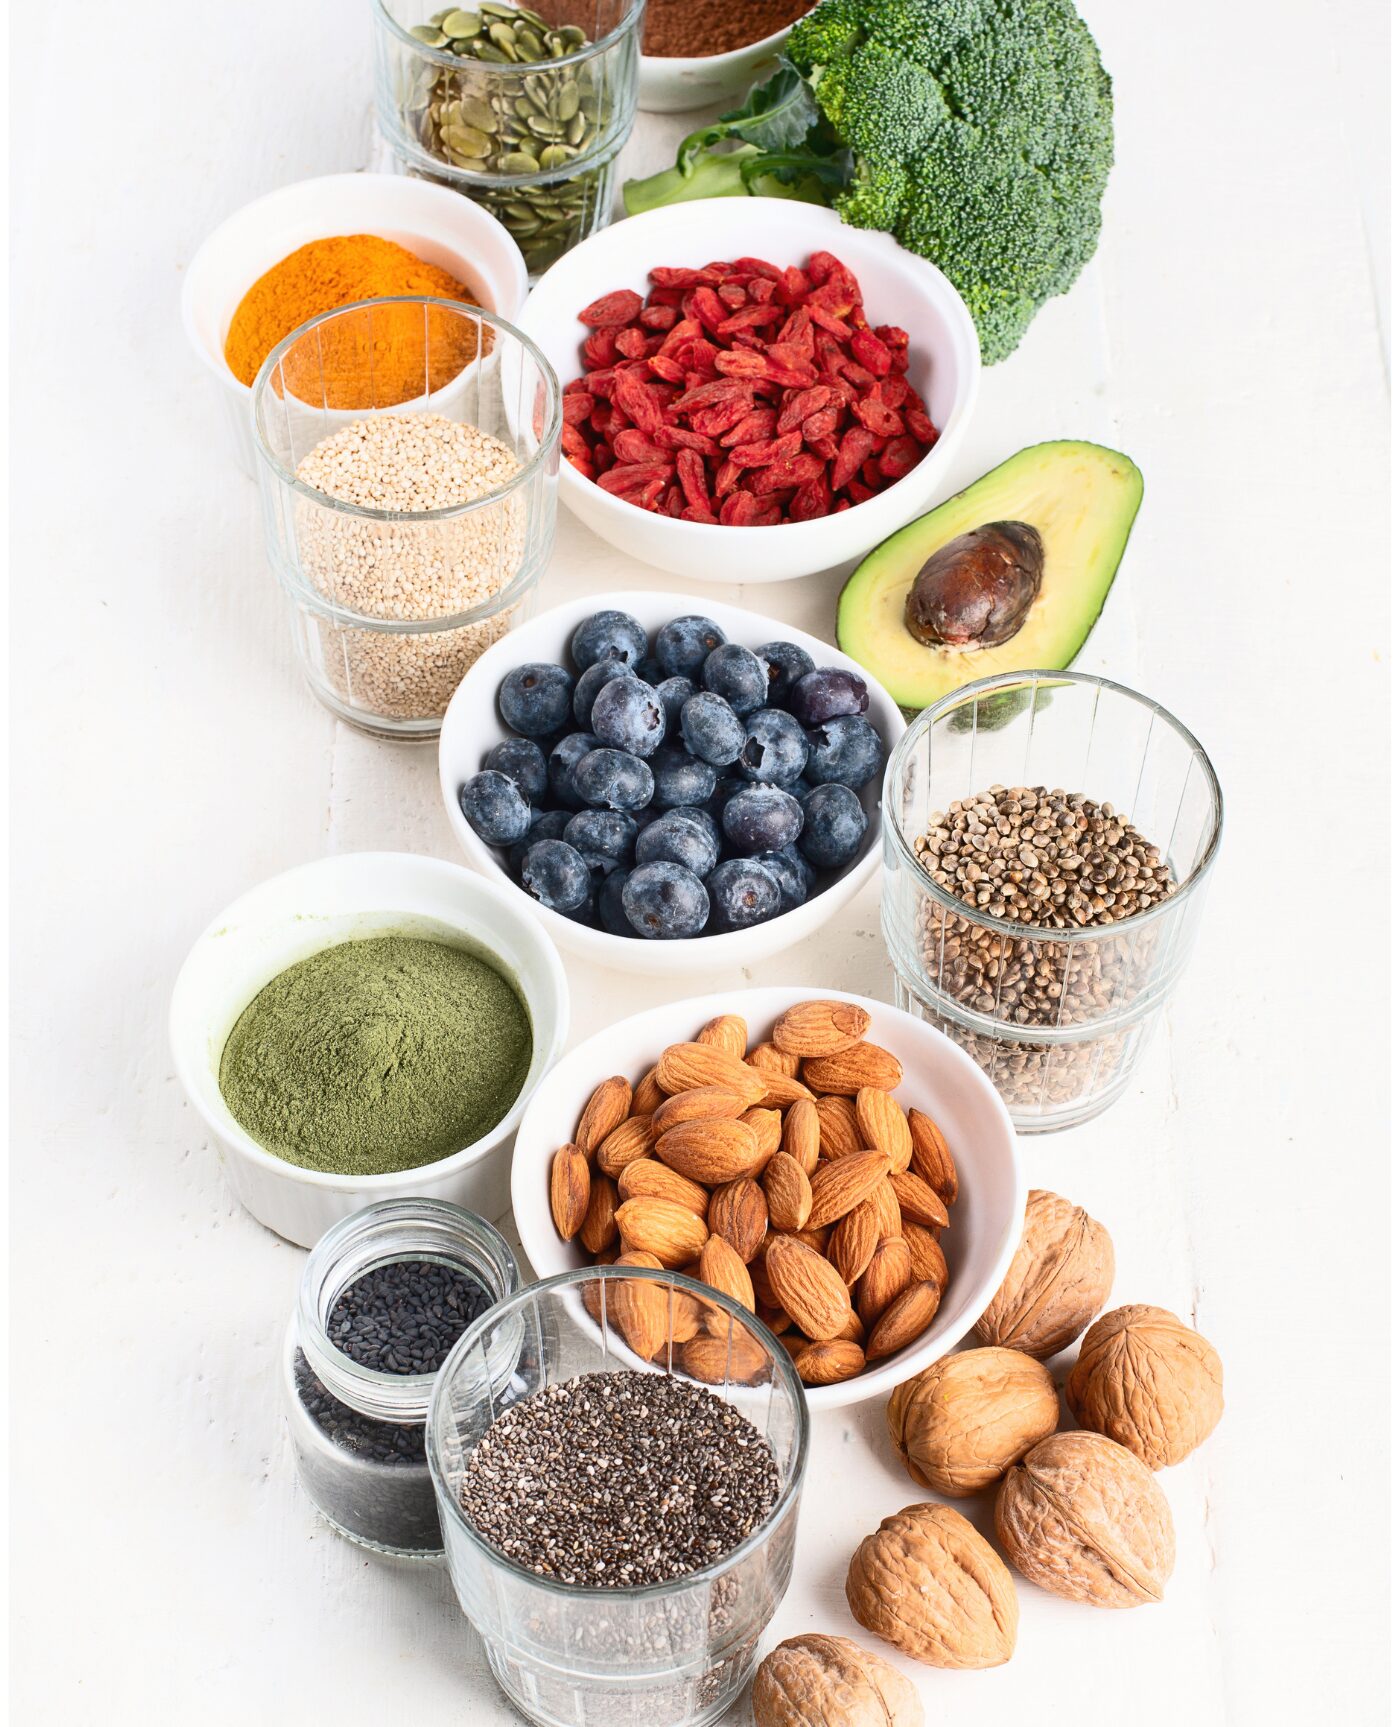 Various healthy foods in bowls such as chia seeds, blueberries, almonds, etc.